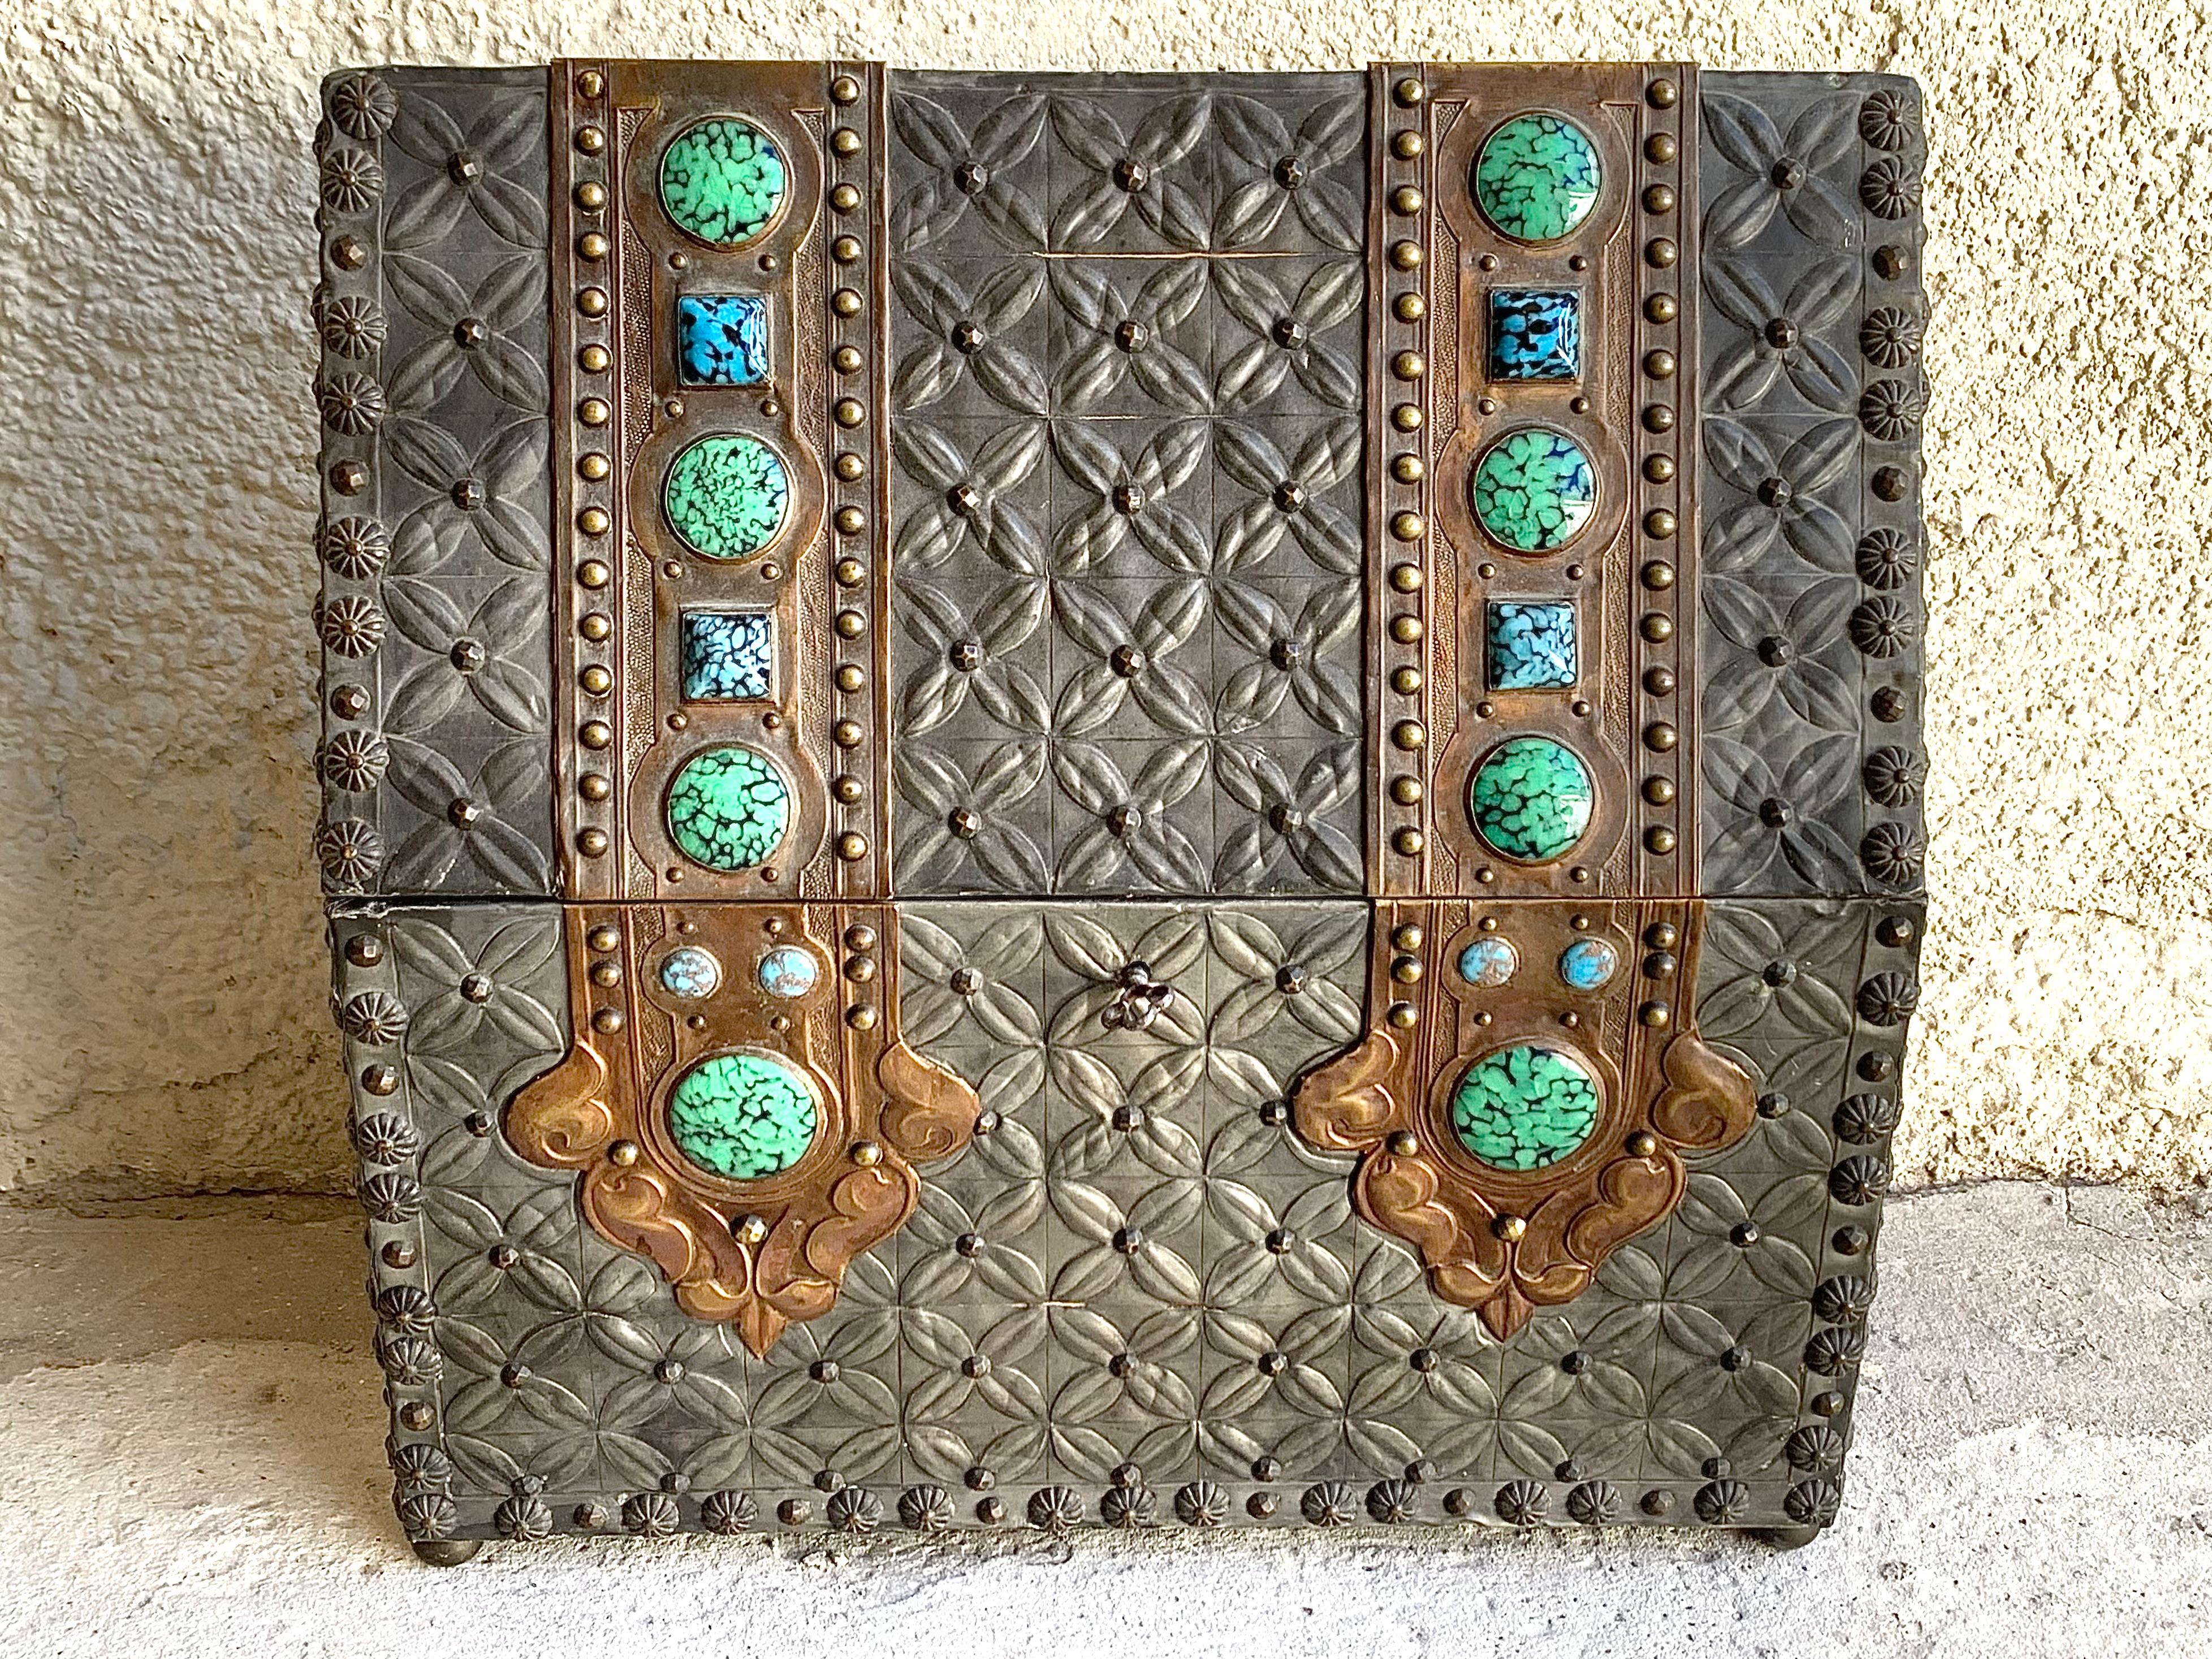 It was a great pleasure to find this rare Arts & Crafts pewter and copper box.
The copper applications are decorated with green and blue glas cabochons.
The wooden carcass is covered entirely with pewter, embossed with quatrefoils. The edges of the